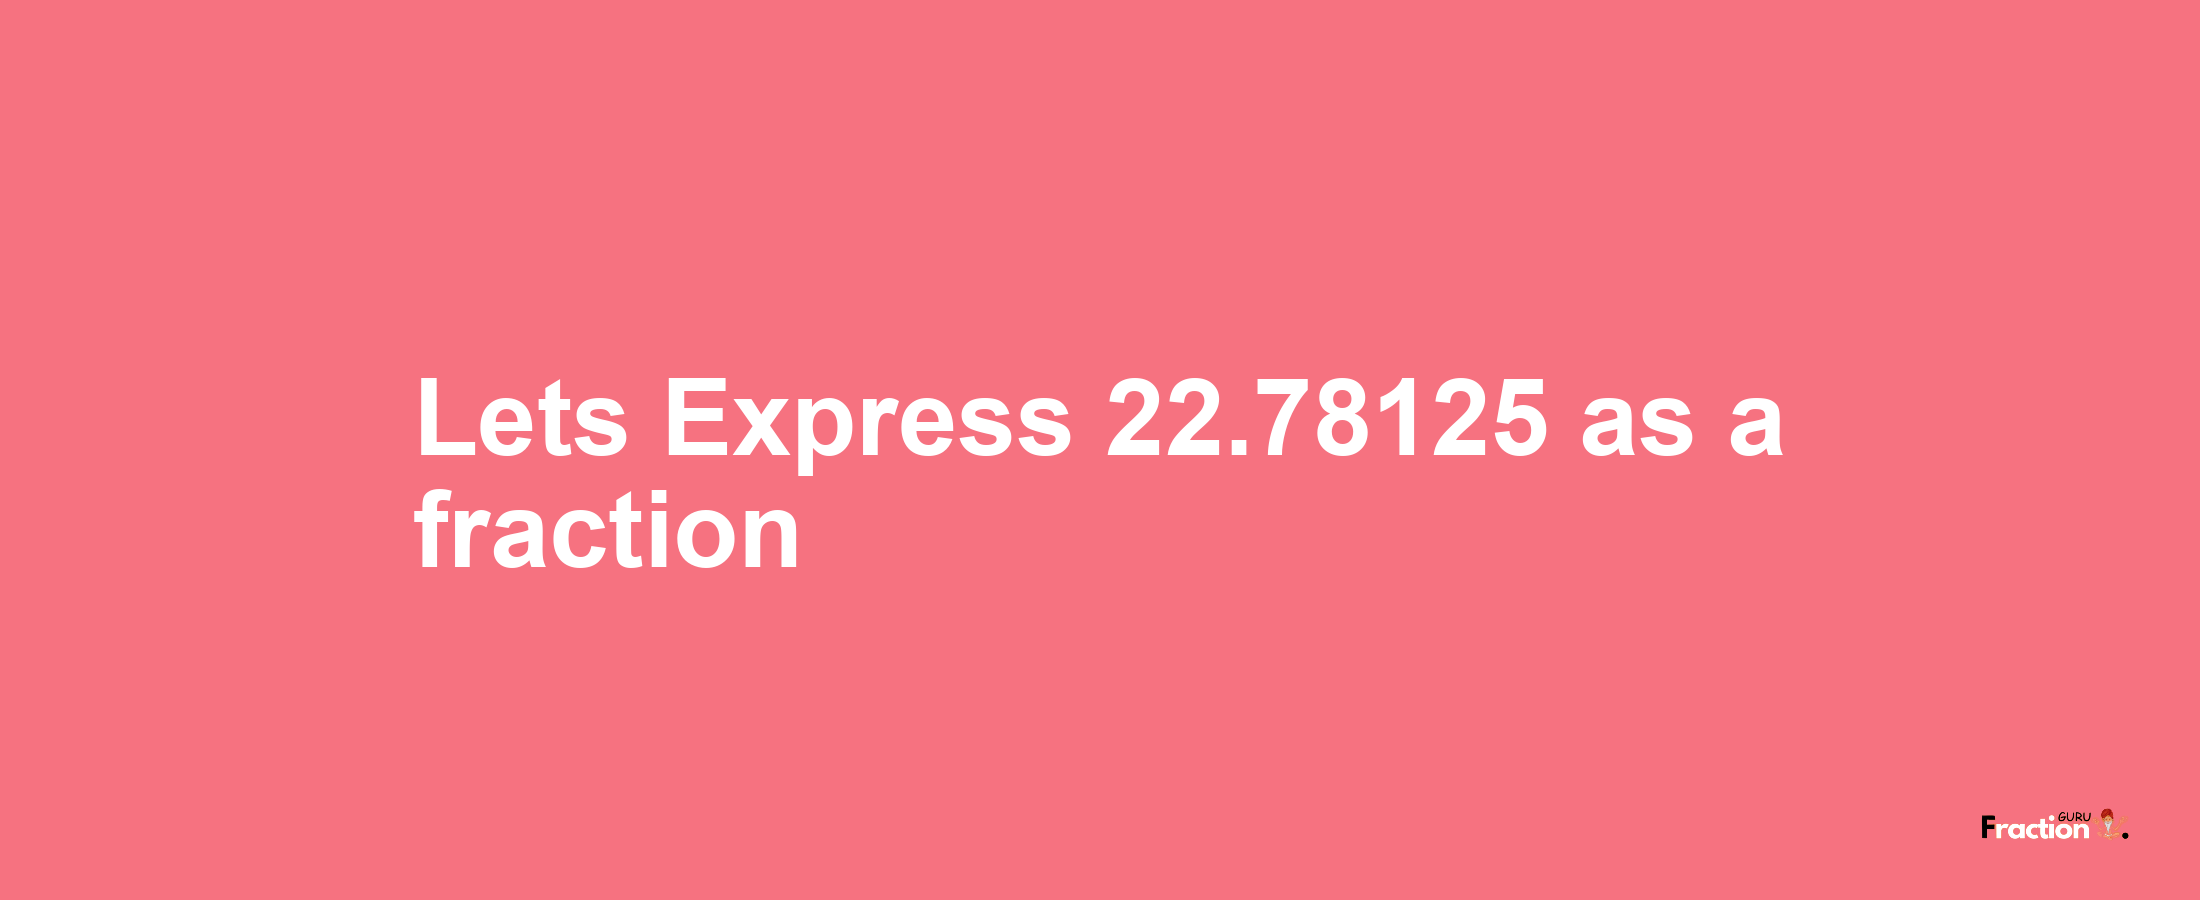 Lets Express 22.78125 as afraction